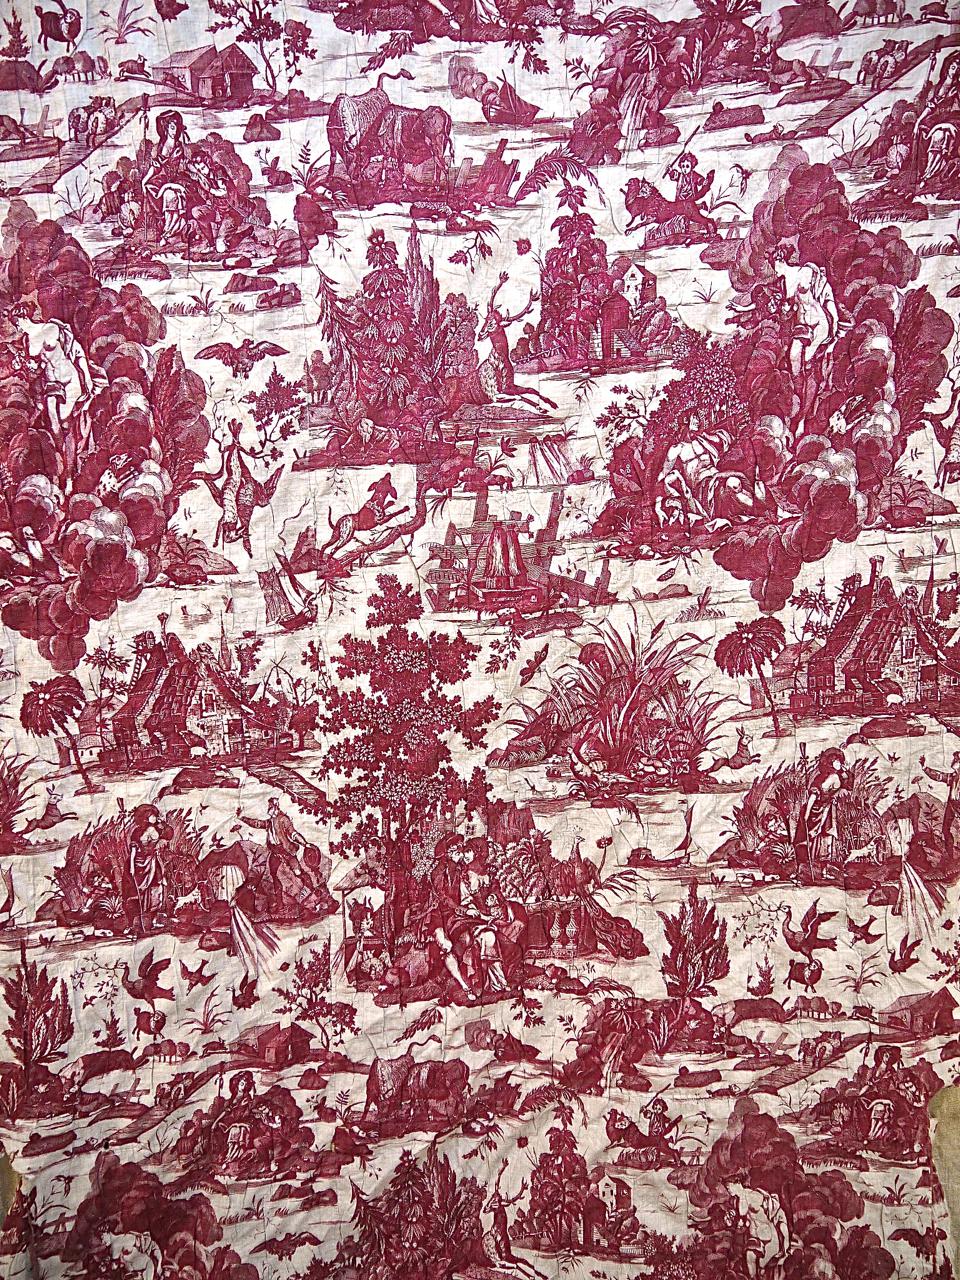 French circa 1785 toile from Beautiran gelling the story of ‘Diane et Emdymion’ about how the Roman goddess Diane fell in love with Endymion a young shepherd living on a mountain where he tends his sheep. With other romantic and pastoral scenes.